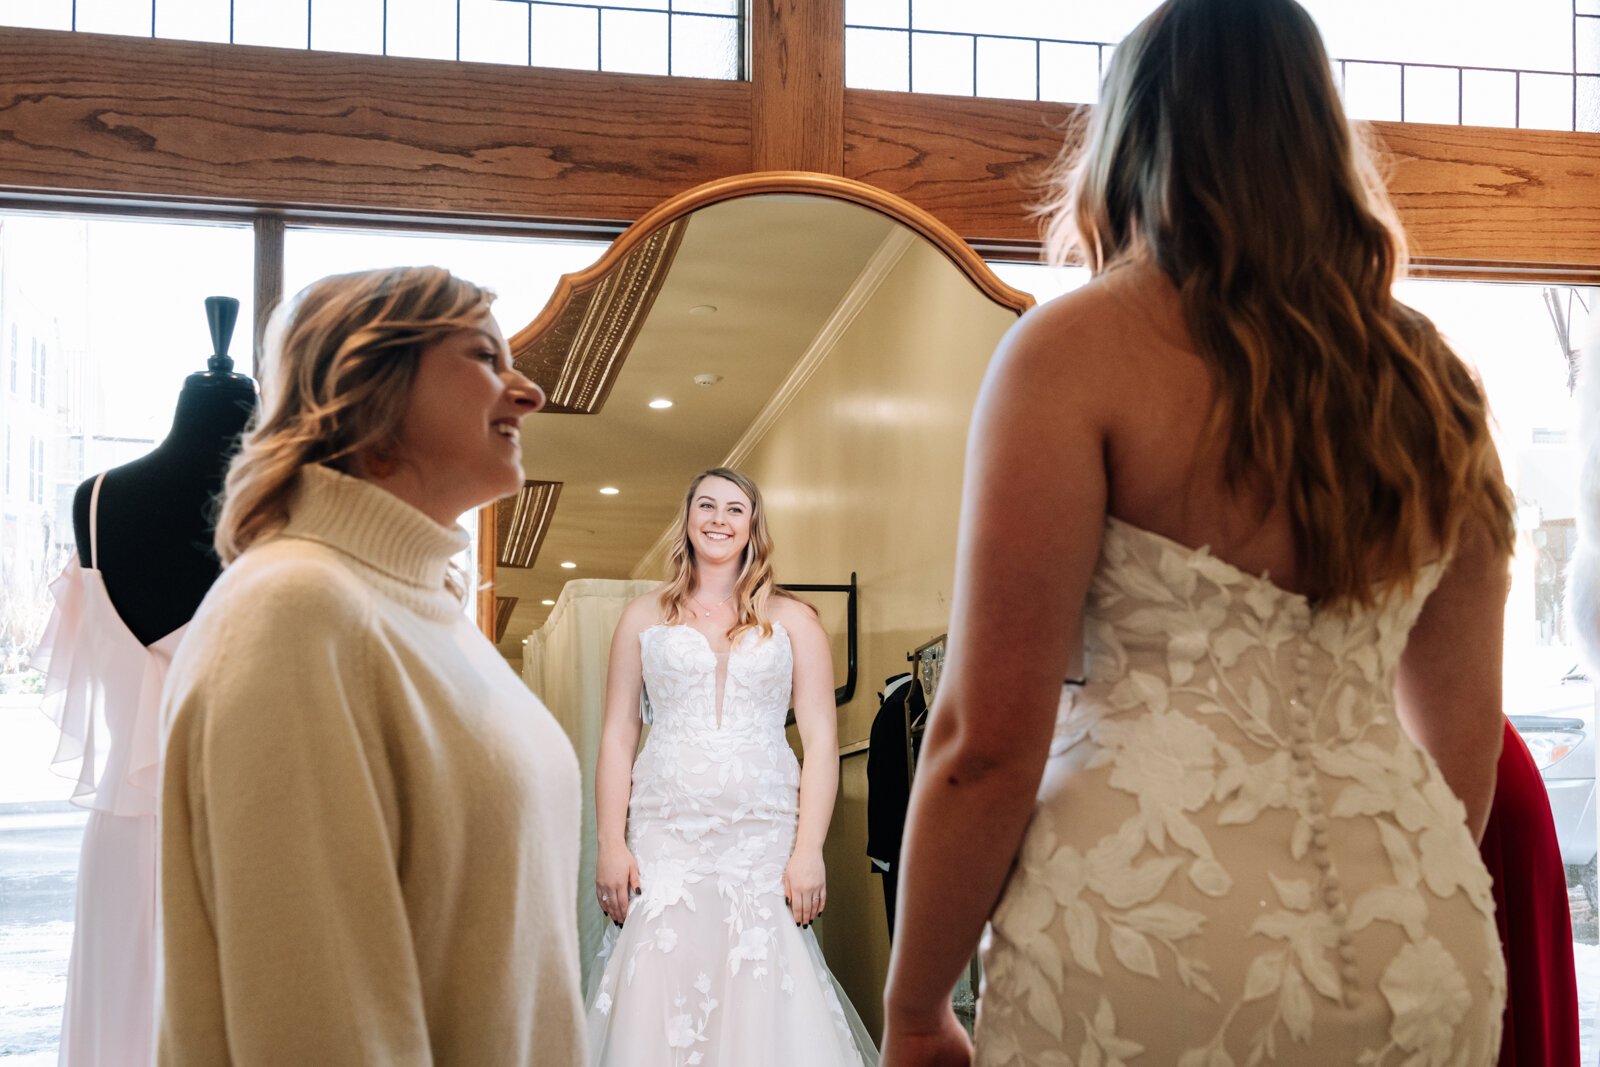 Bride Bailey Lundmark talks with her mother Missy Hartley while trying on a dress in front of The Yes Wall at  Ellen's Bridal & Dress Boutique.